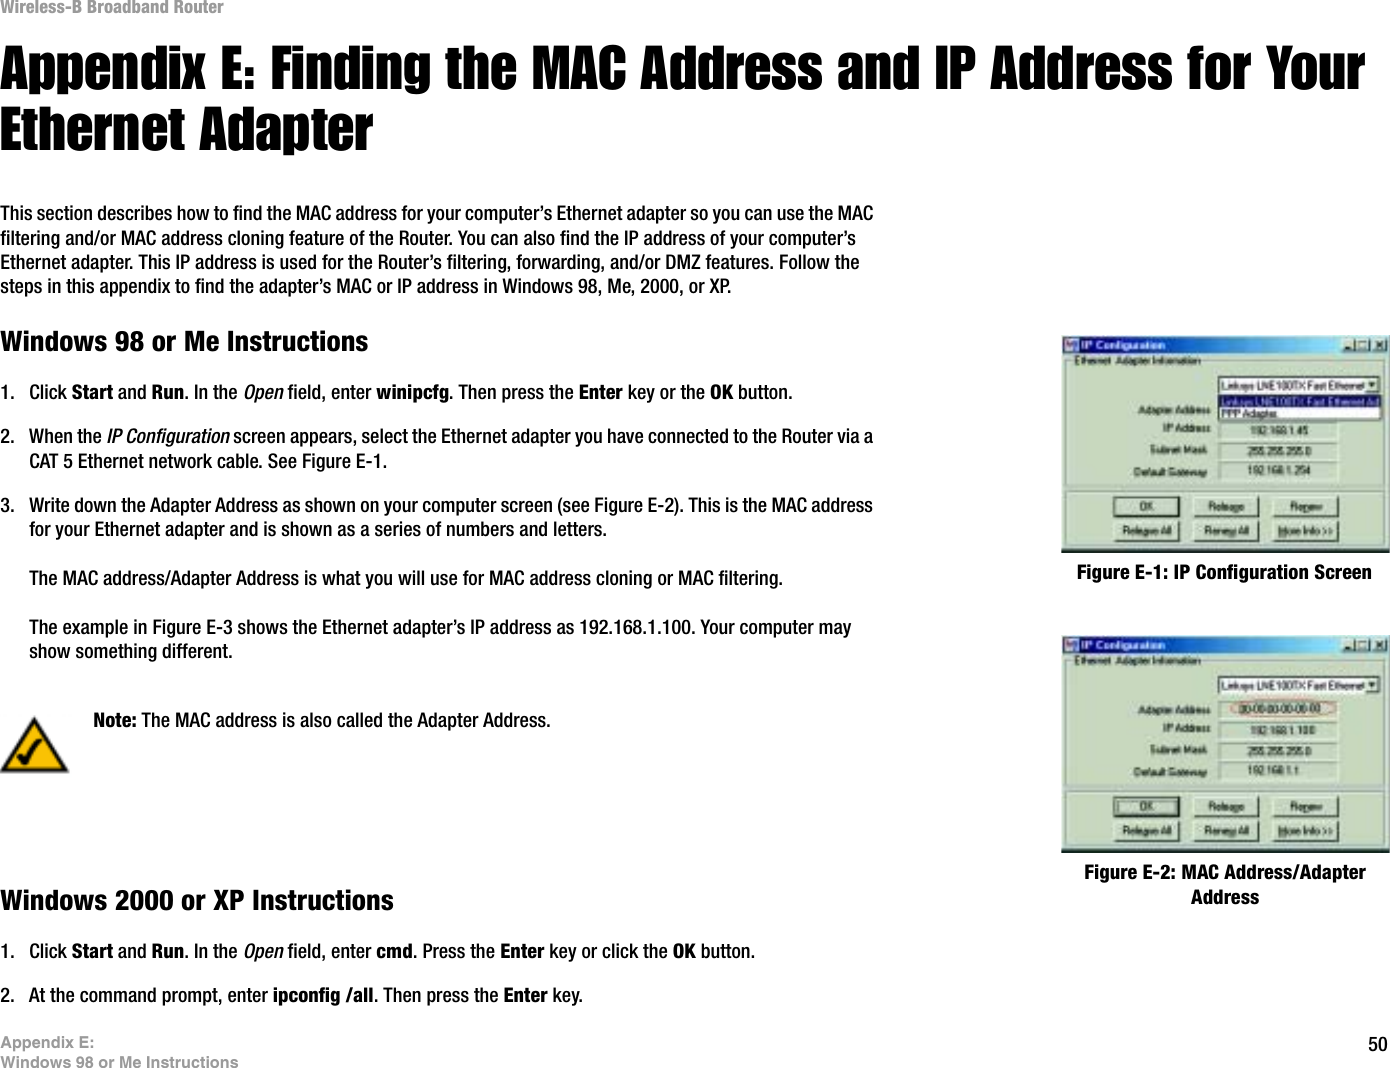 50Appendix E: Windows 98 or Me InstructionsWireless-B Broadband RouterAppendix E: Finding the MAC Address and IP Address for Your Ethernet AdapterThis section describes how to find the MAC address for your computer’s Ethernet adapter so you can use the MAC filtering and/or MAC address cloning feature of the Router. You can also find the IP address of your computer’s Ethernet adapter. This IP address is used for the Router’s filtering, forwarding, and/or DMZ features. Follow the steps in this appendix to find the adapter’s MAC or IP address in Windows 98, Me, 2000, or XP.Windows 98 or Me Instructions1. Click Start and Run. In the Open field, enter winipcfg. Then press the Enter key or the OK button. 2. When the IP Configuration screen appears, select the Ethernet adapter you have connected to the Router via a CAT 5 Ethernet network cable. See Figure E-1.3. Write down the Adapter Address as shown on your computer screen (see Figure E-2). This is the MAC address for your Ethernet adapter and is shown as a series of numbers and letters.The MAC address/Adapter Address is what you will use for MAC address cloning or MAC filtering.The example in Figure E-3 shows the Ethernet adapter’s IP address as 192.168.1.100. Your computer may show something different.Windows 2000 or XP Instructions1. Click Start and Run. In the Open field, enter cmd. Press the Enter key or click the OK button.2. At the command prompt, enter ipconfig /all. Then press the Enter key.Figure E-2: MAC Address/Adapter AddressFigure E-1: IP Configuration ScreenNote: The MAC address is also called the Adapter Address.